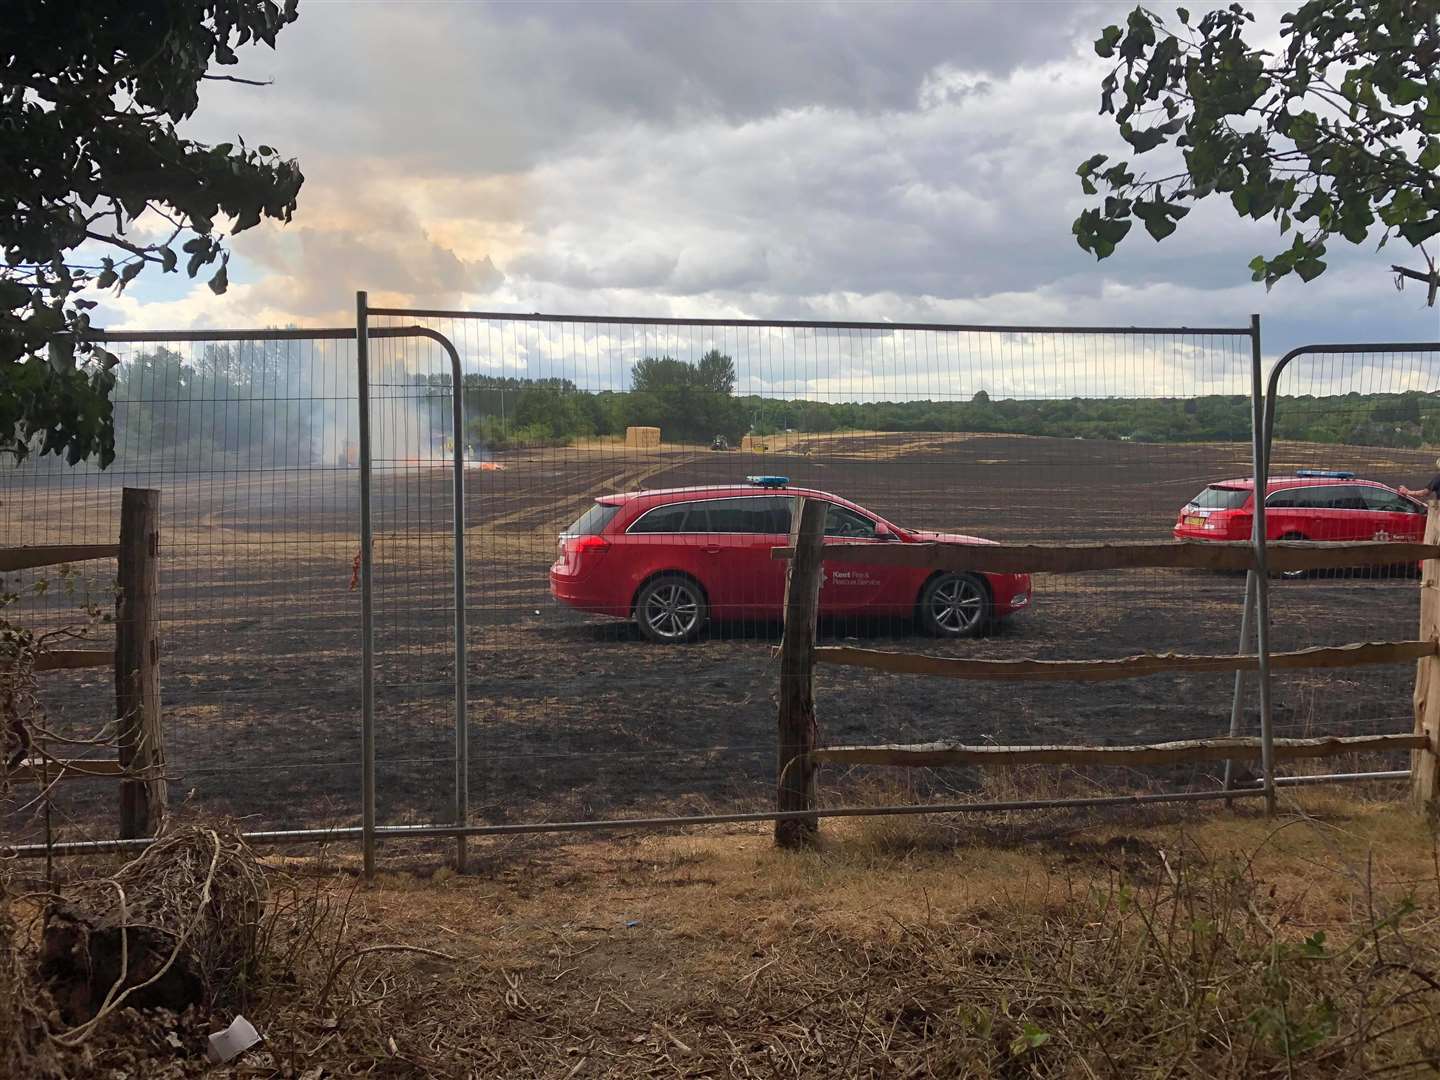 The 57 acres of cornfield at Ashton Way, West Malling, was destroyed by fire (3130408)